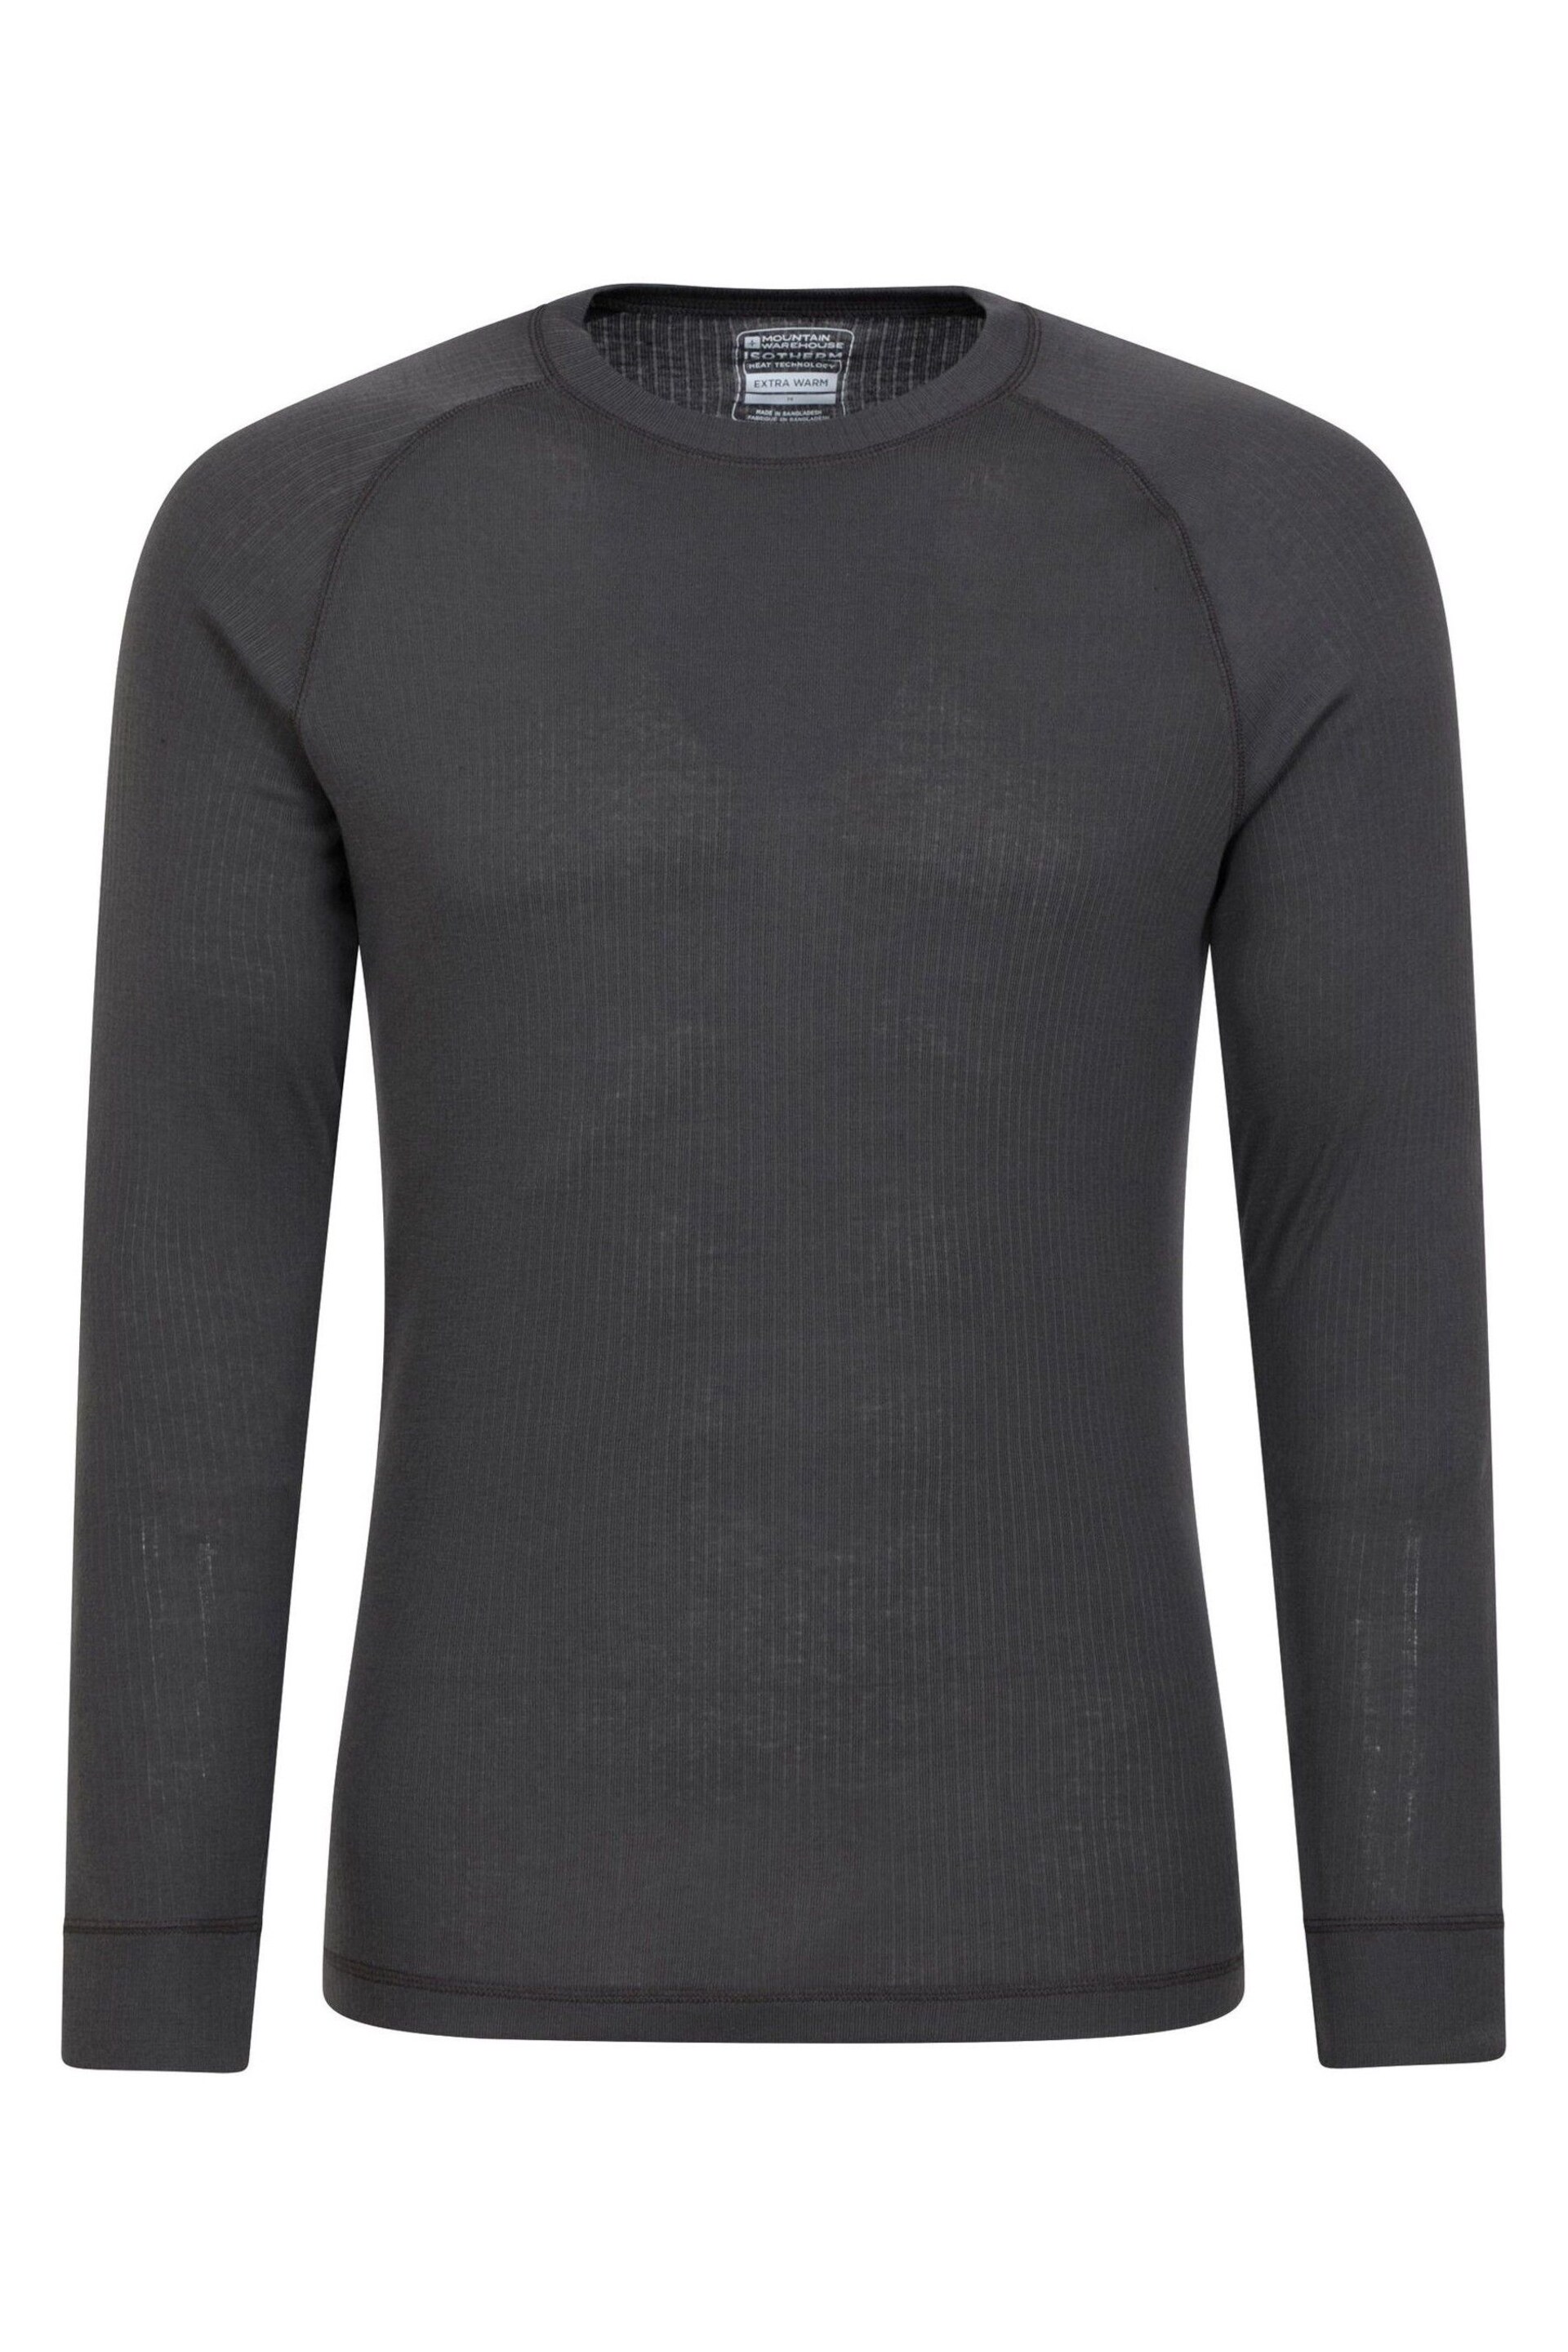 Mountain Warehouse Grey Talus Mens Thermal Top Multipack - Image 3 of 4